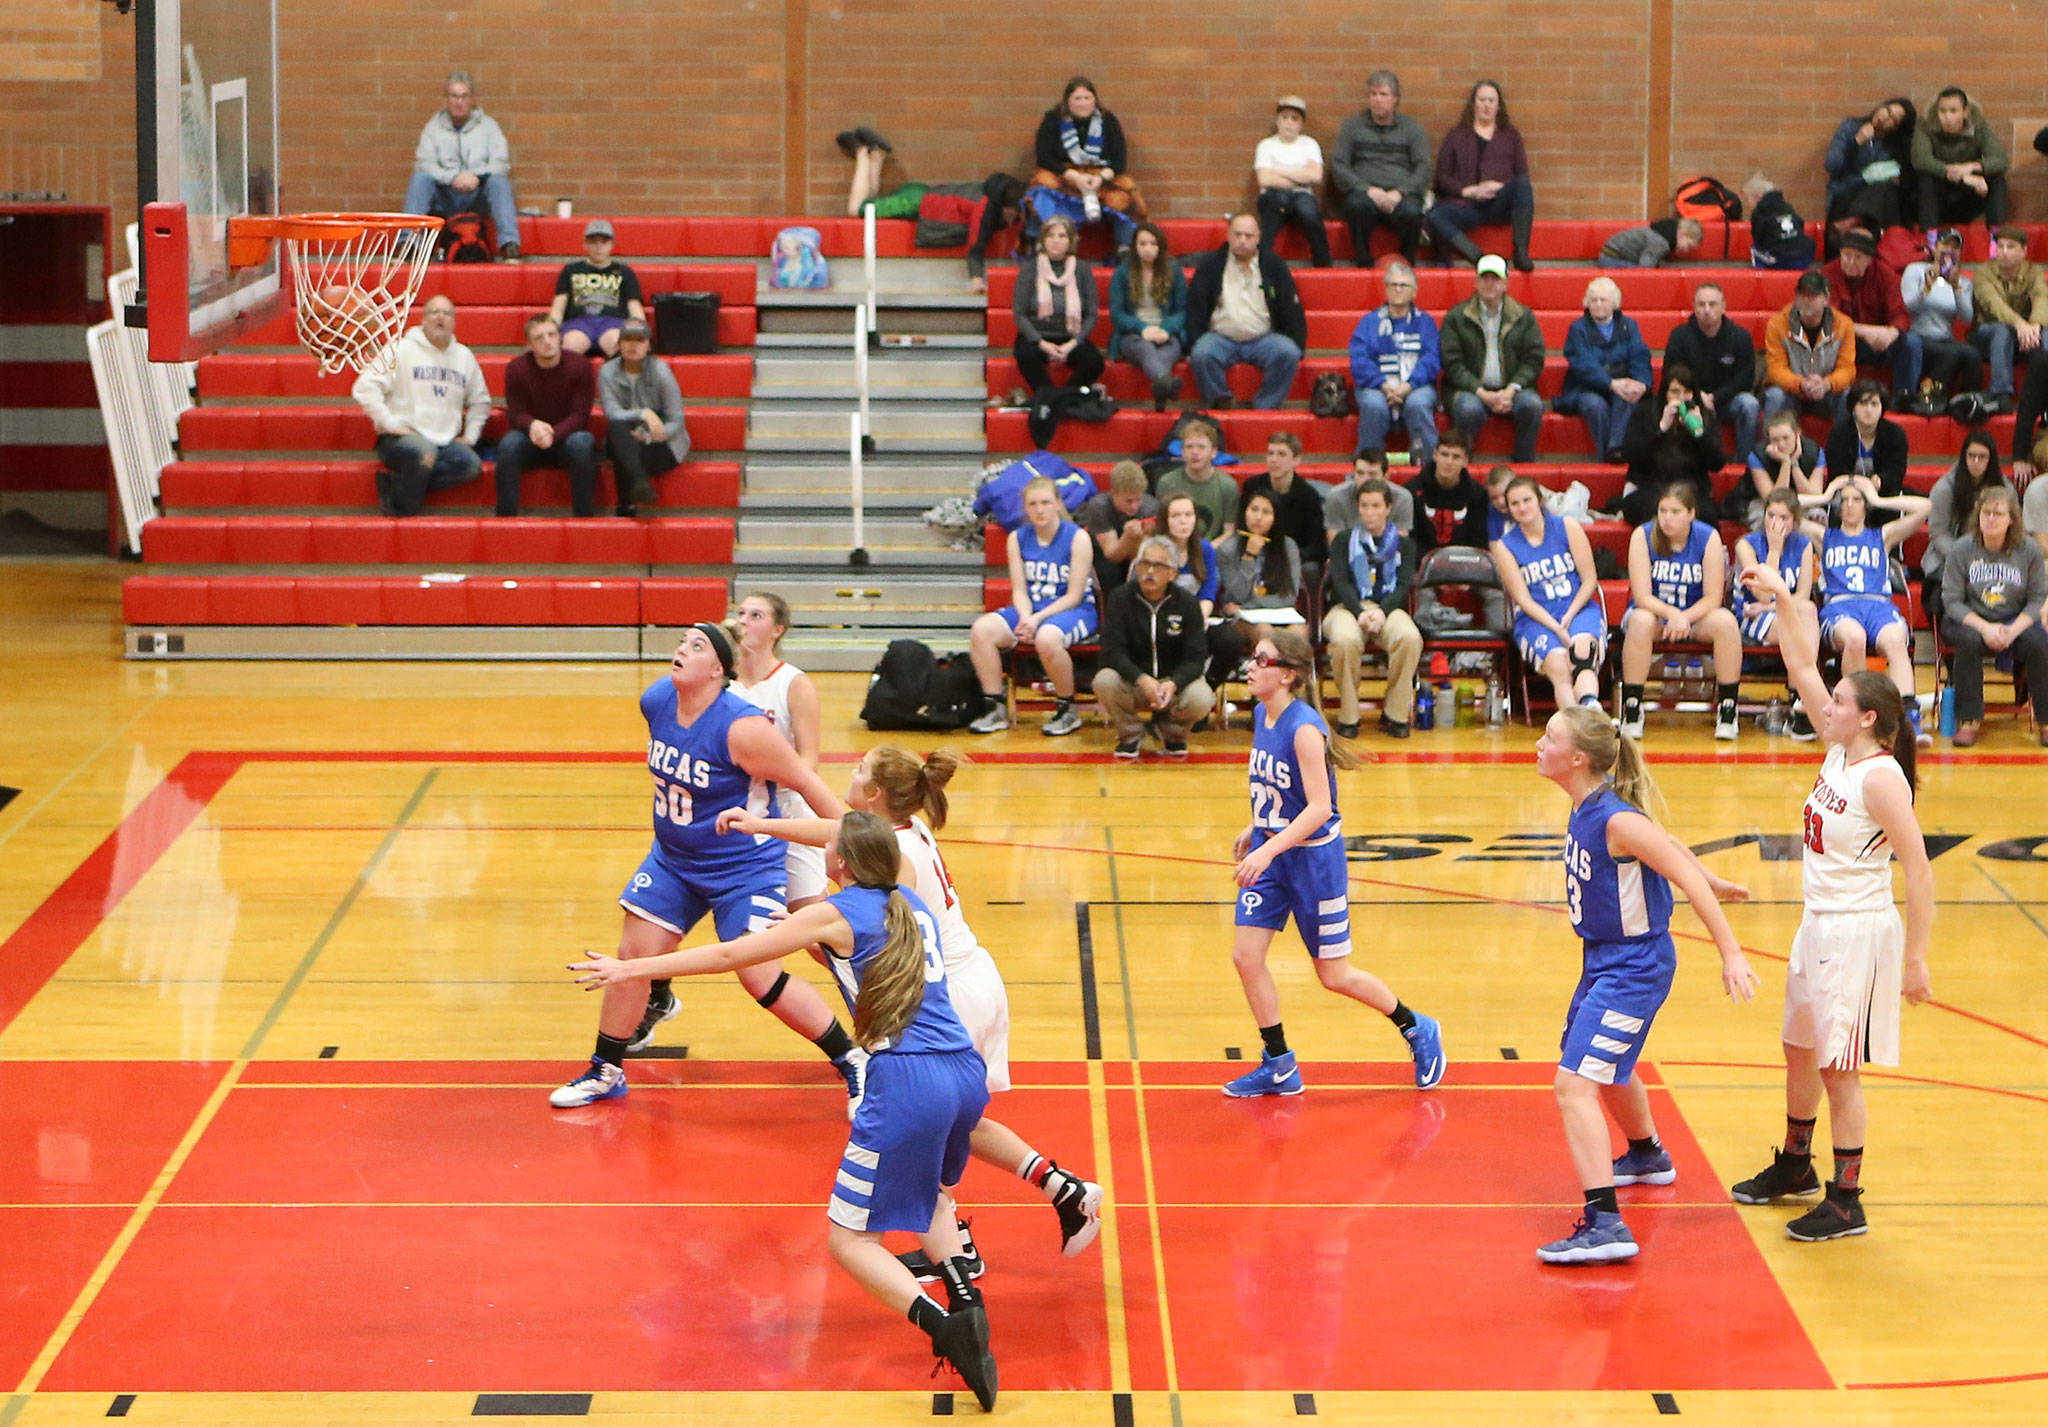 Mikayla Elfrank sinks a free throw for the Wolves in Friday’s game with Orcas Island.(Photo by John Fisken)